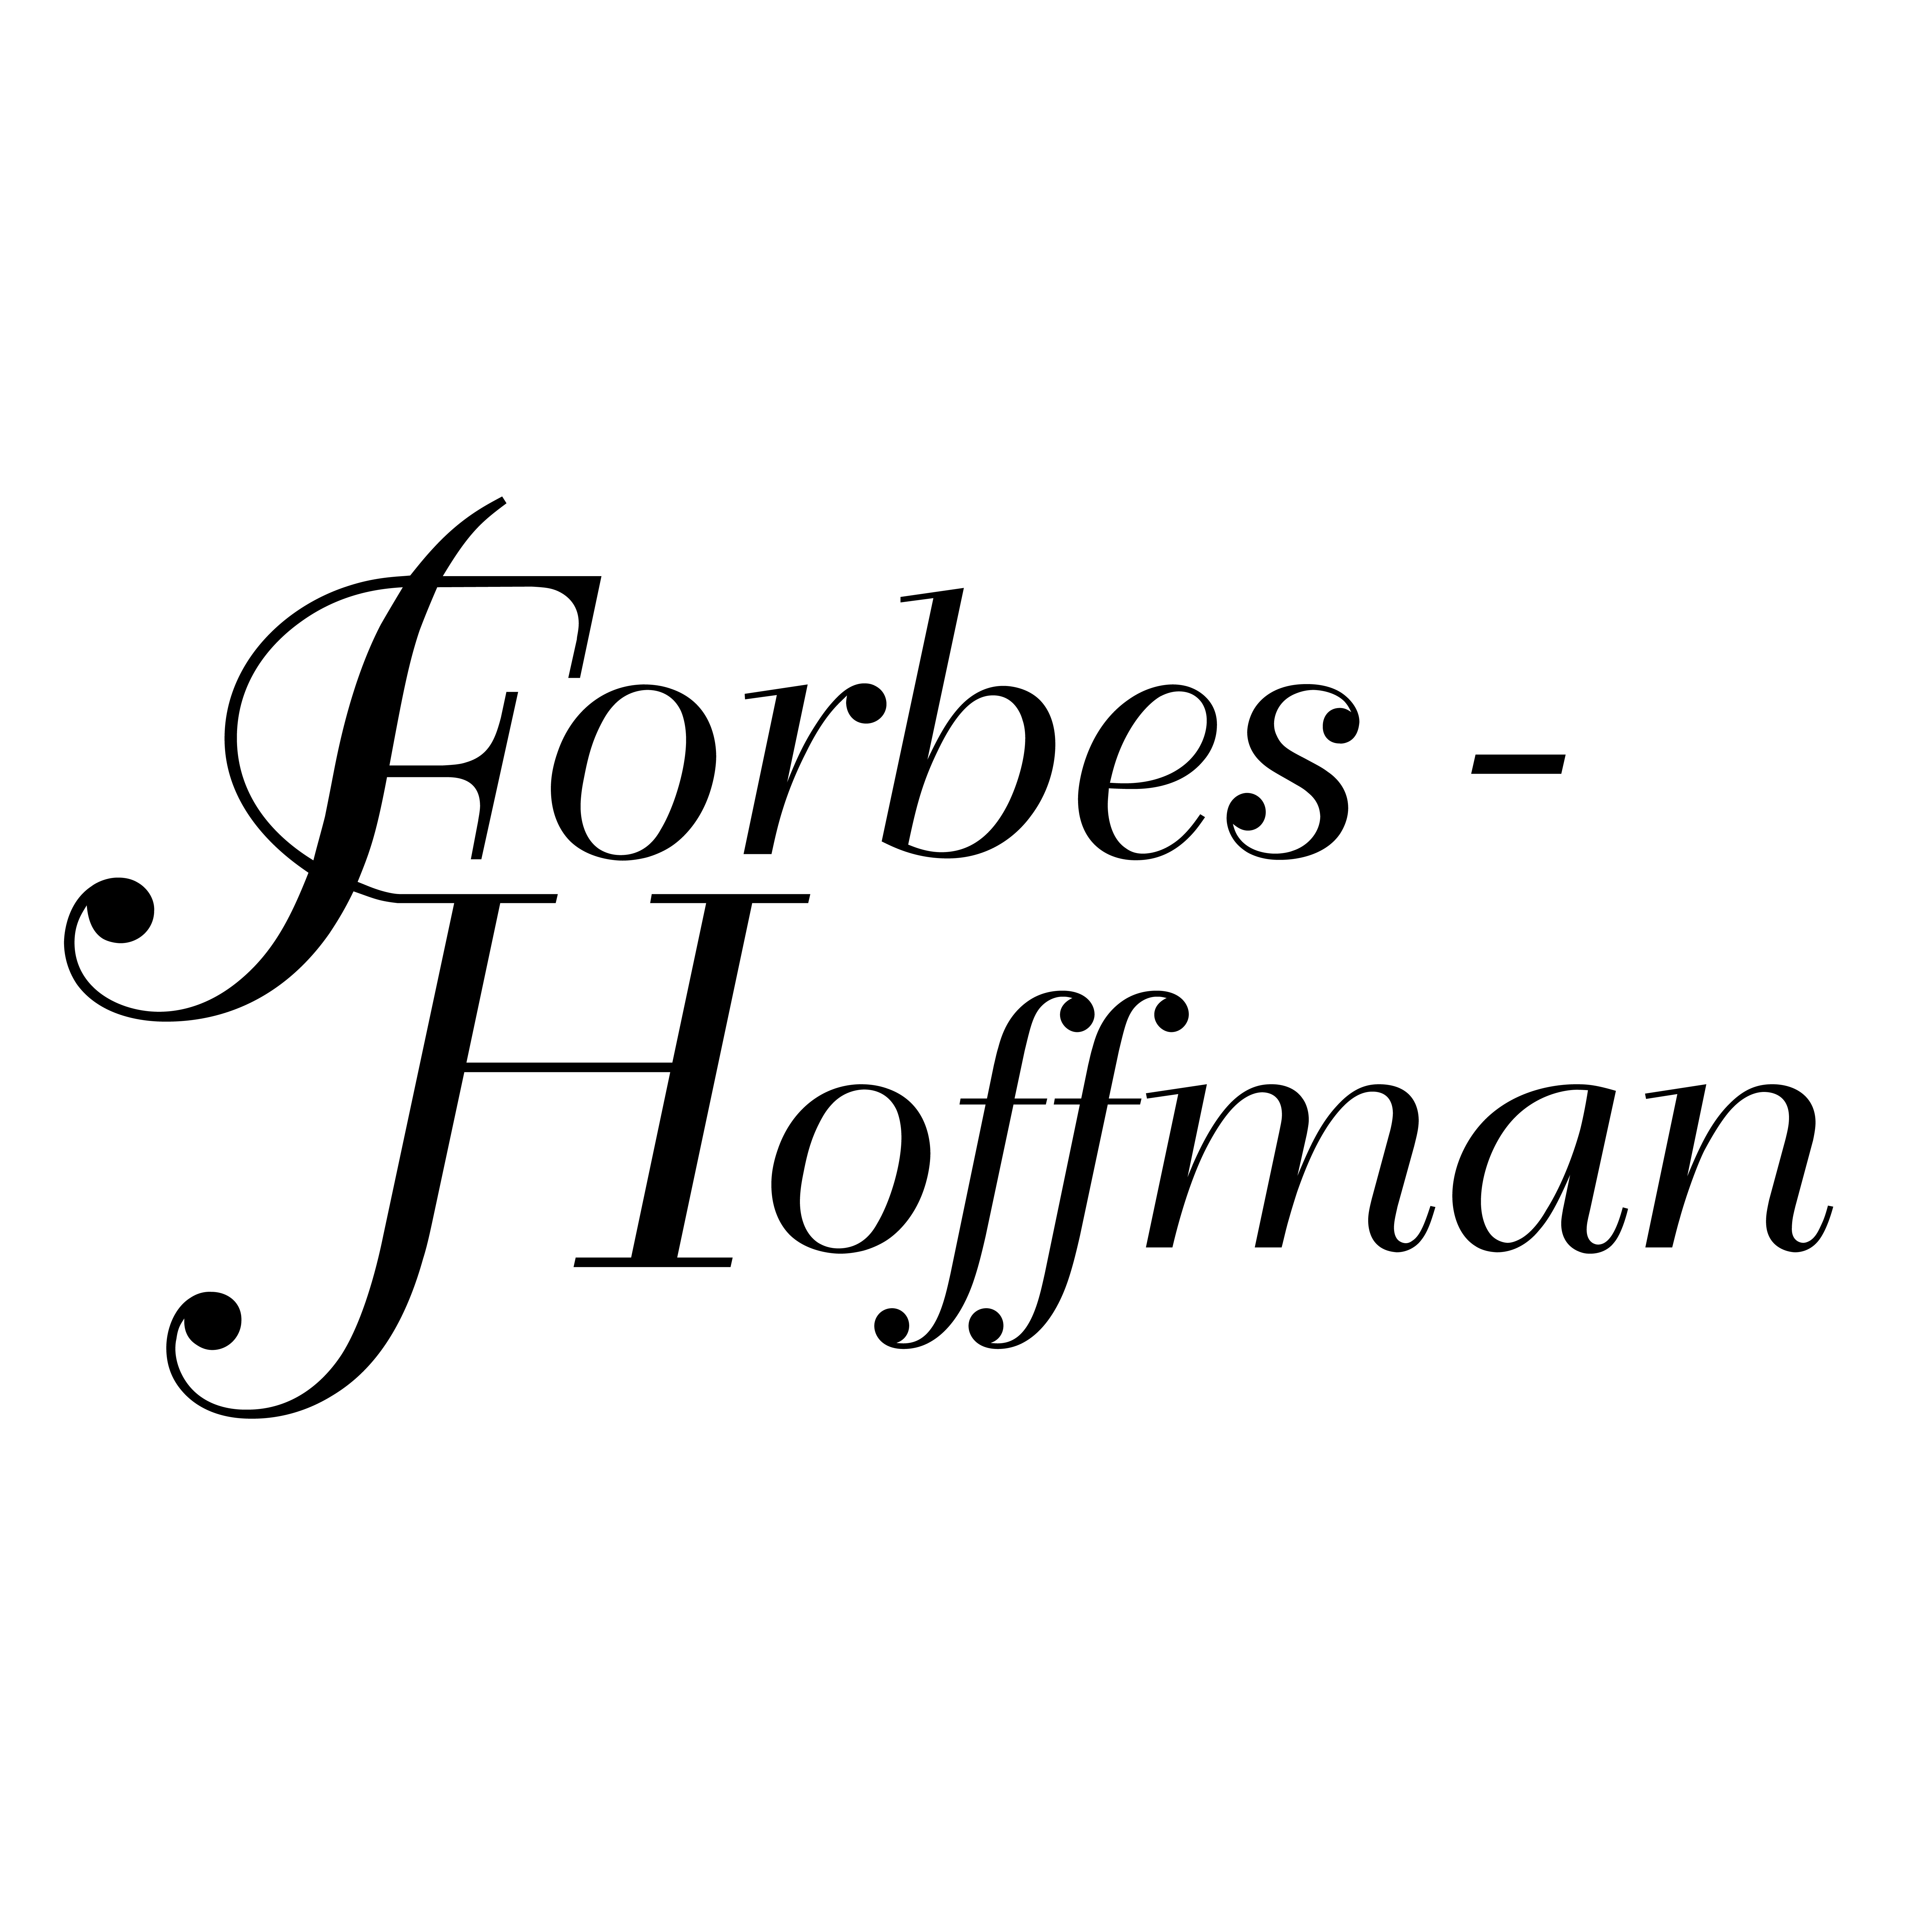 Bath-Forbes-Hoffman Funeral Home